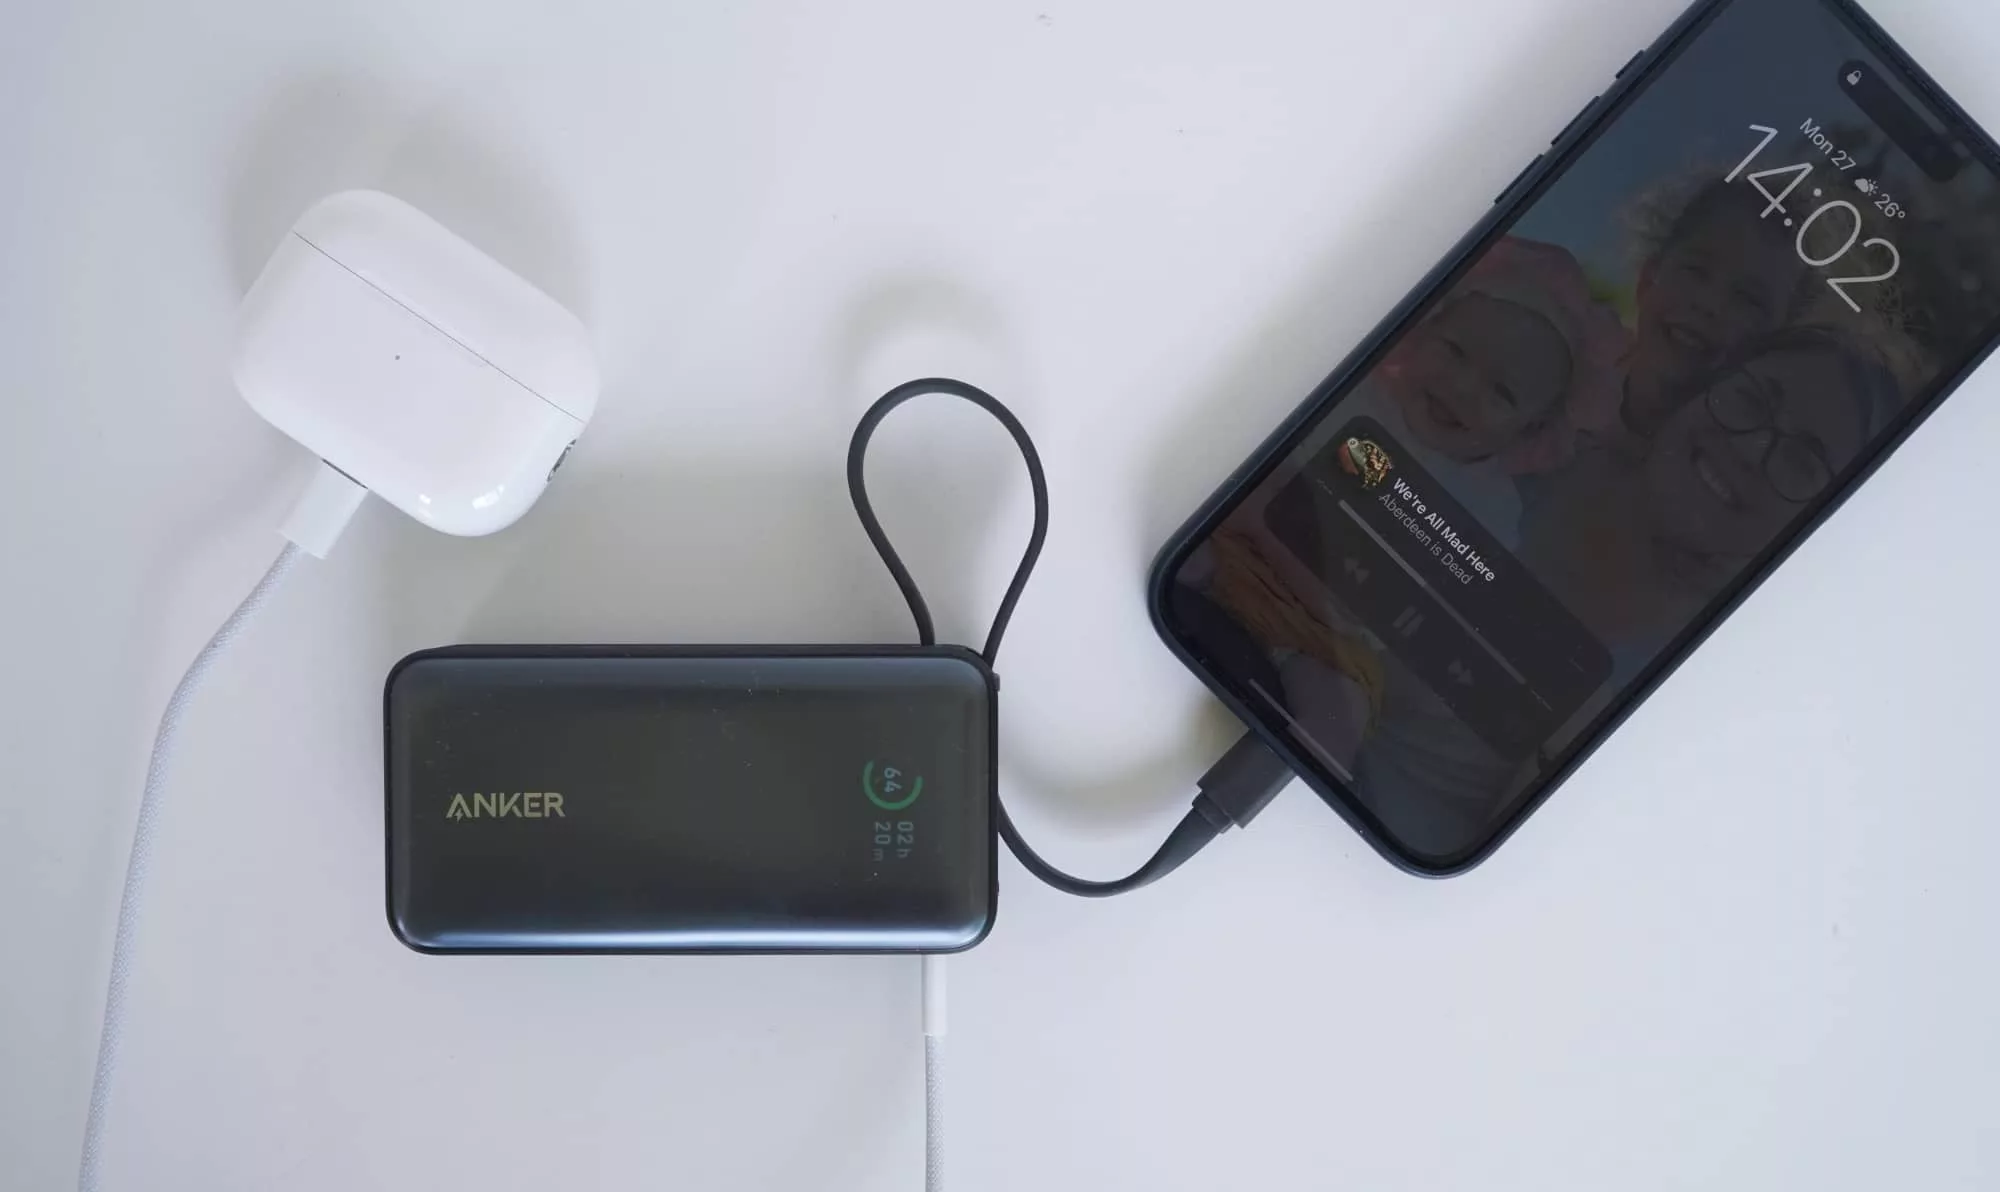 Anker Nano Power Bank Review - Convenient Power To Go